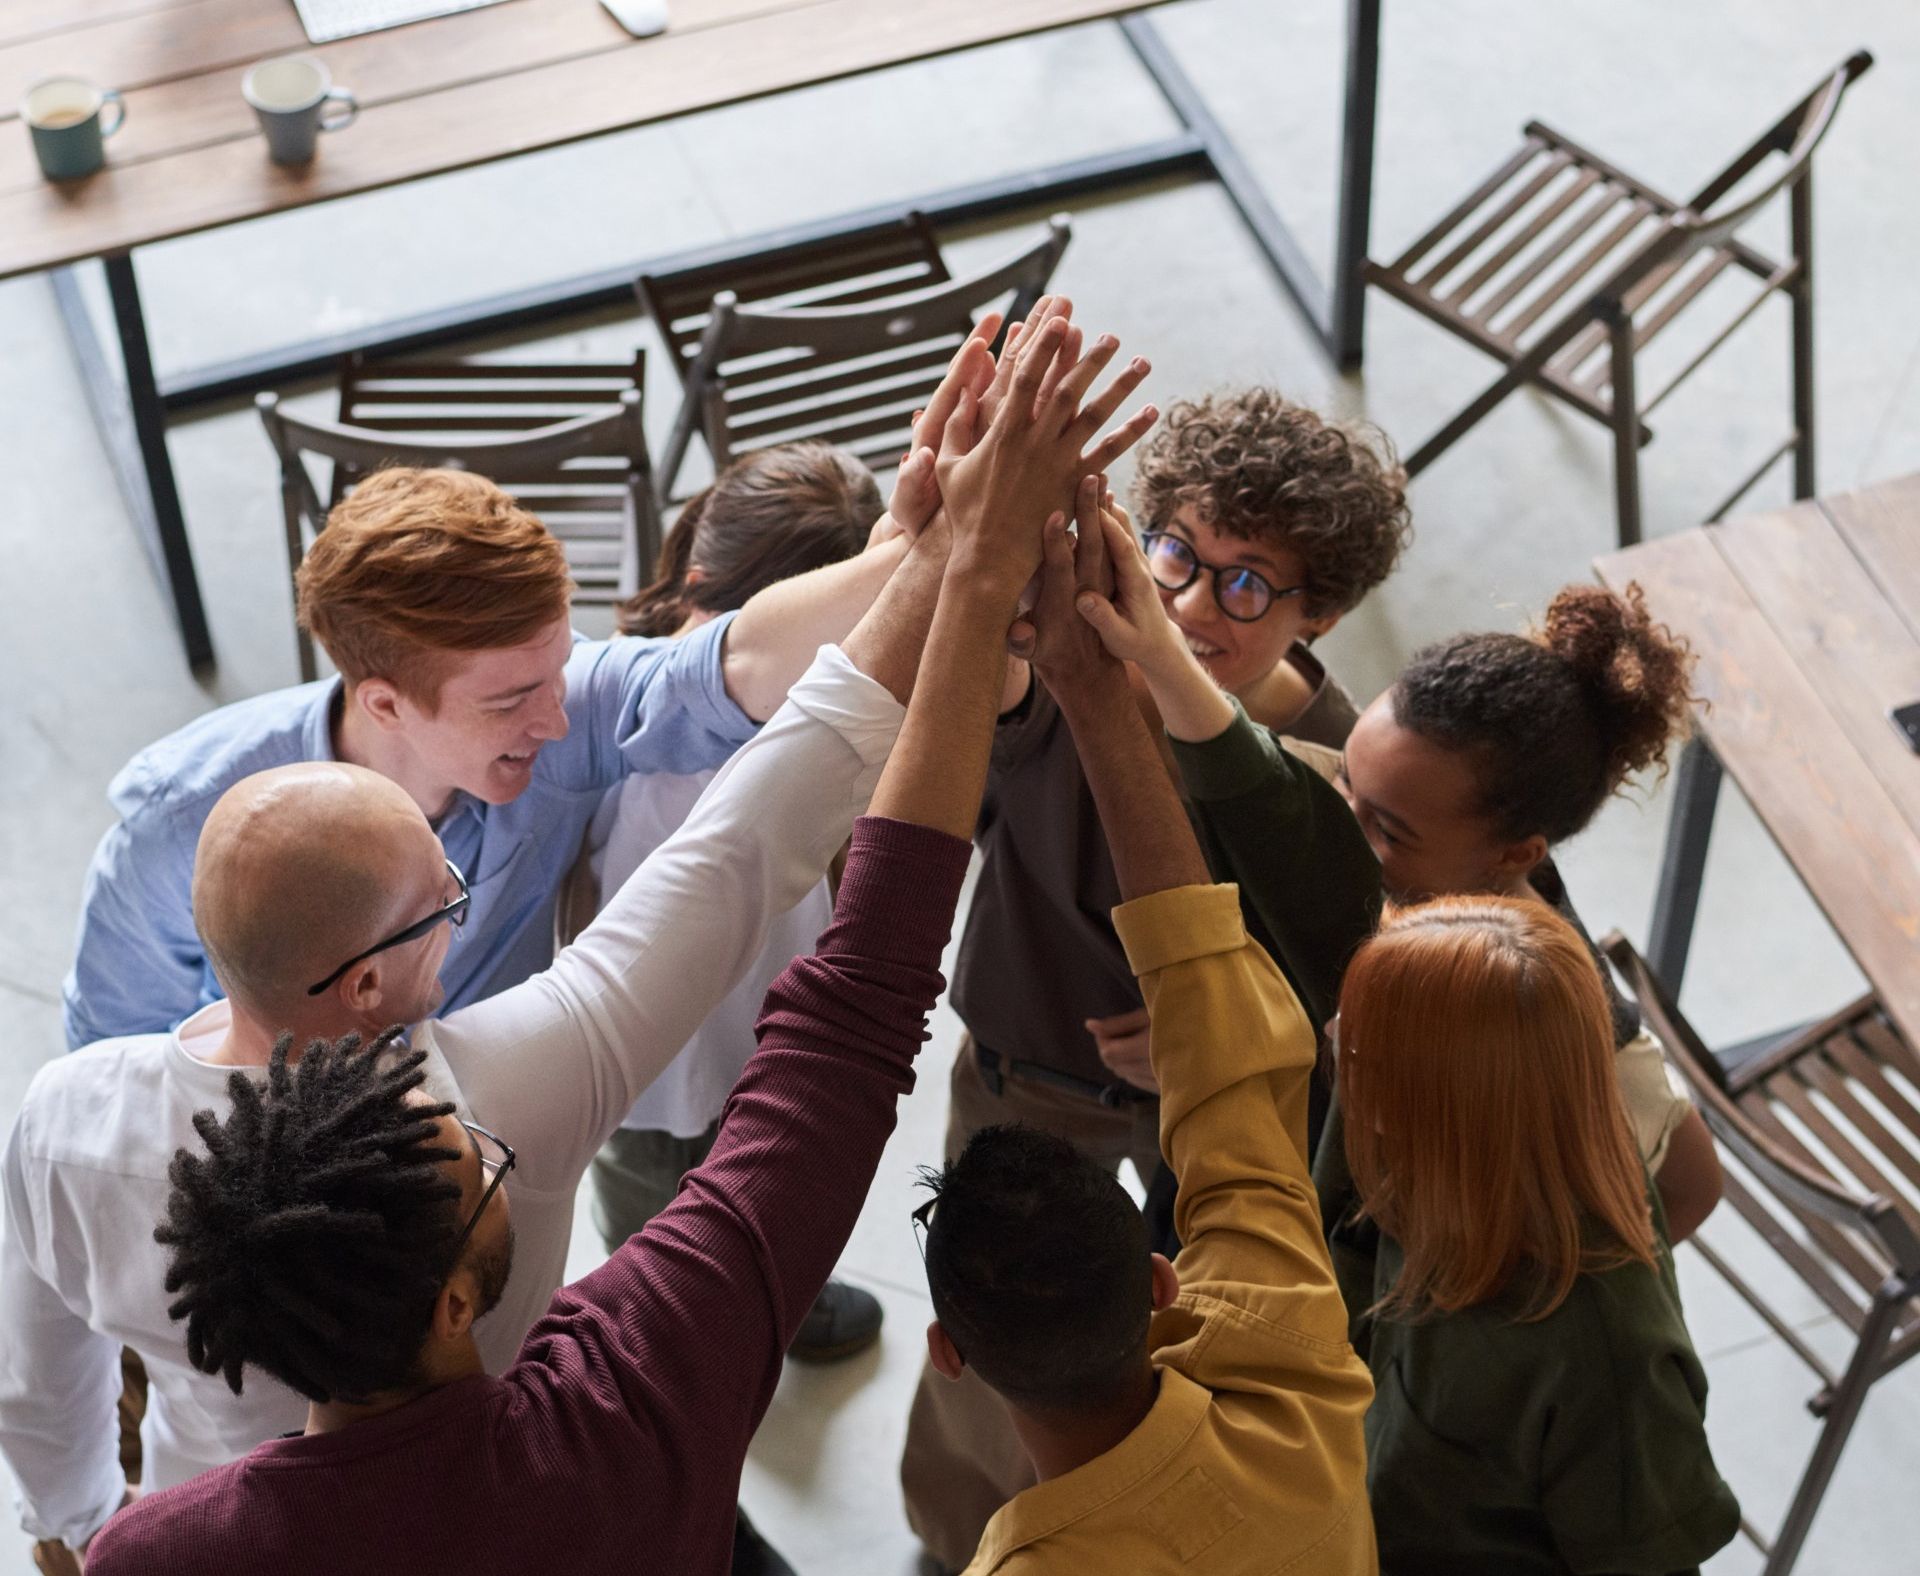 The Networking Edge: How Small Businesses Can Thrive Through Connections